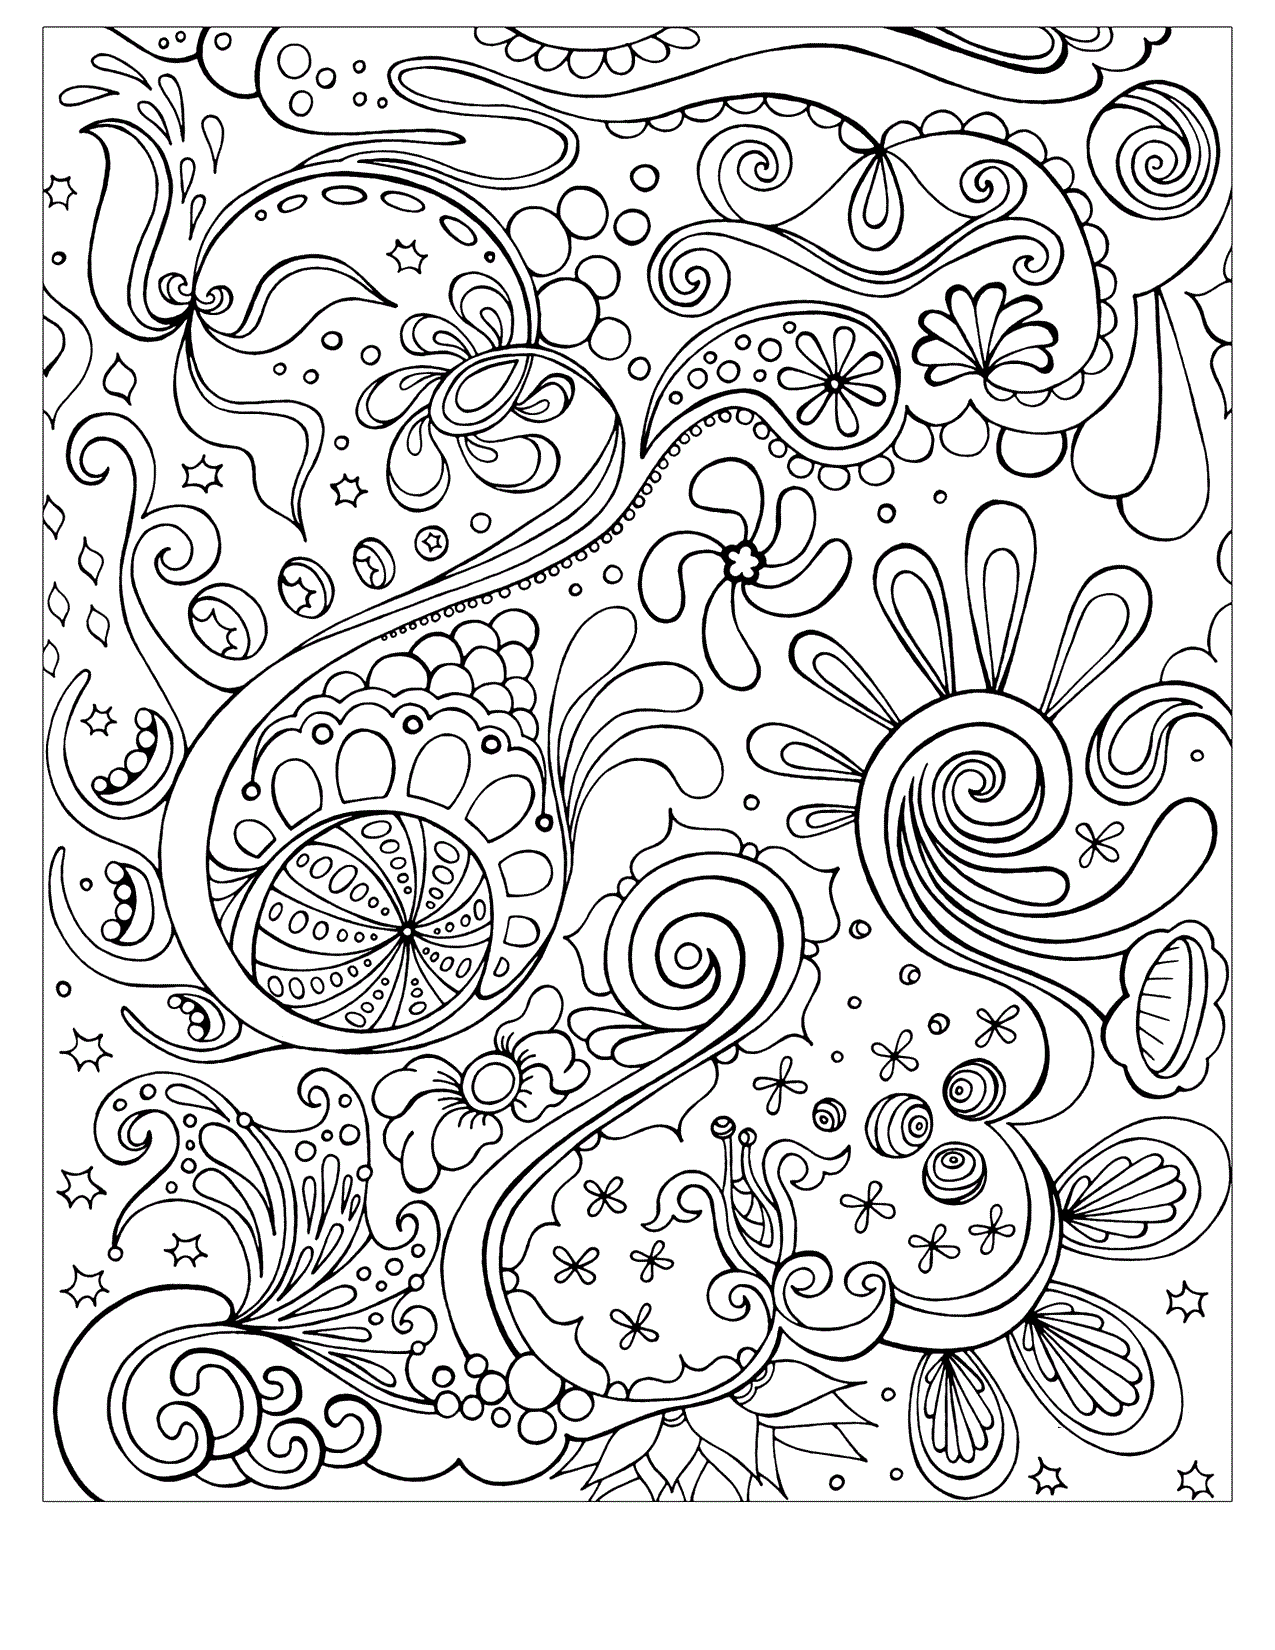 s abstract coloring pages - photo #35